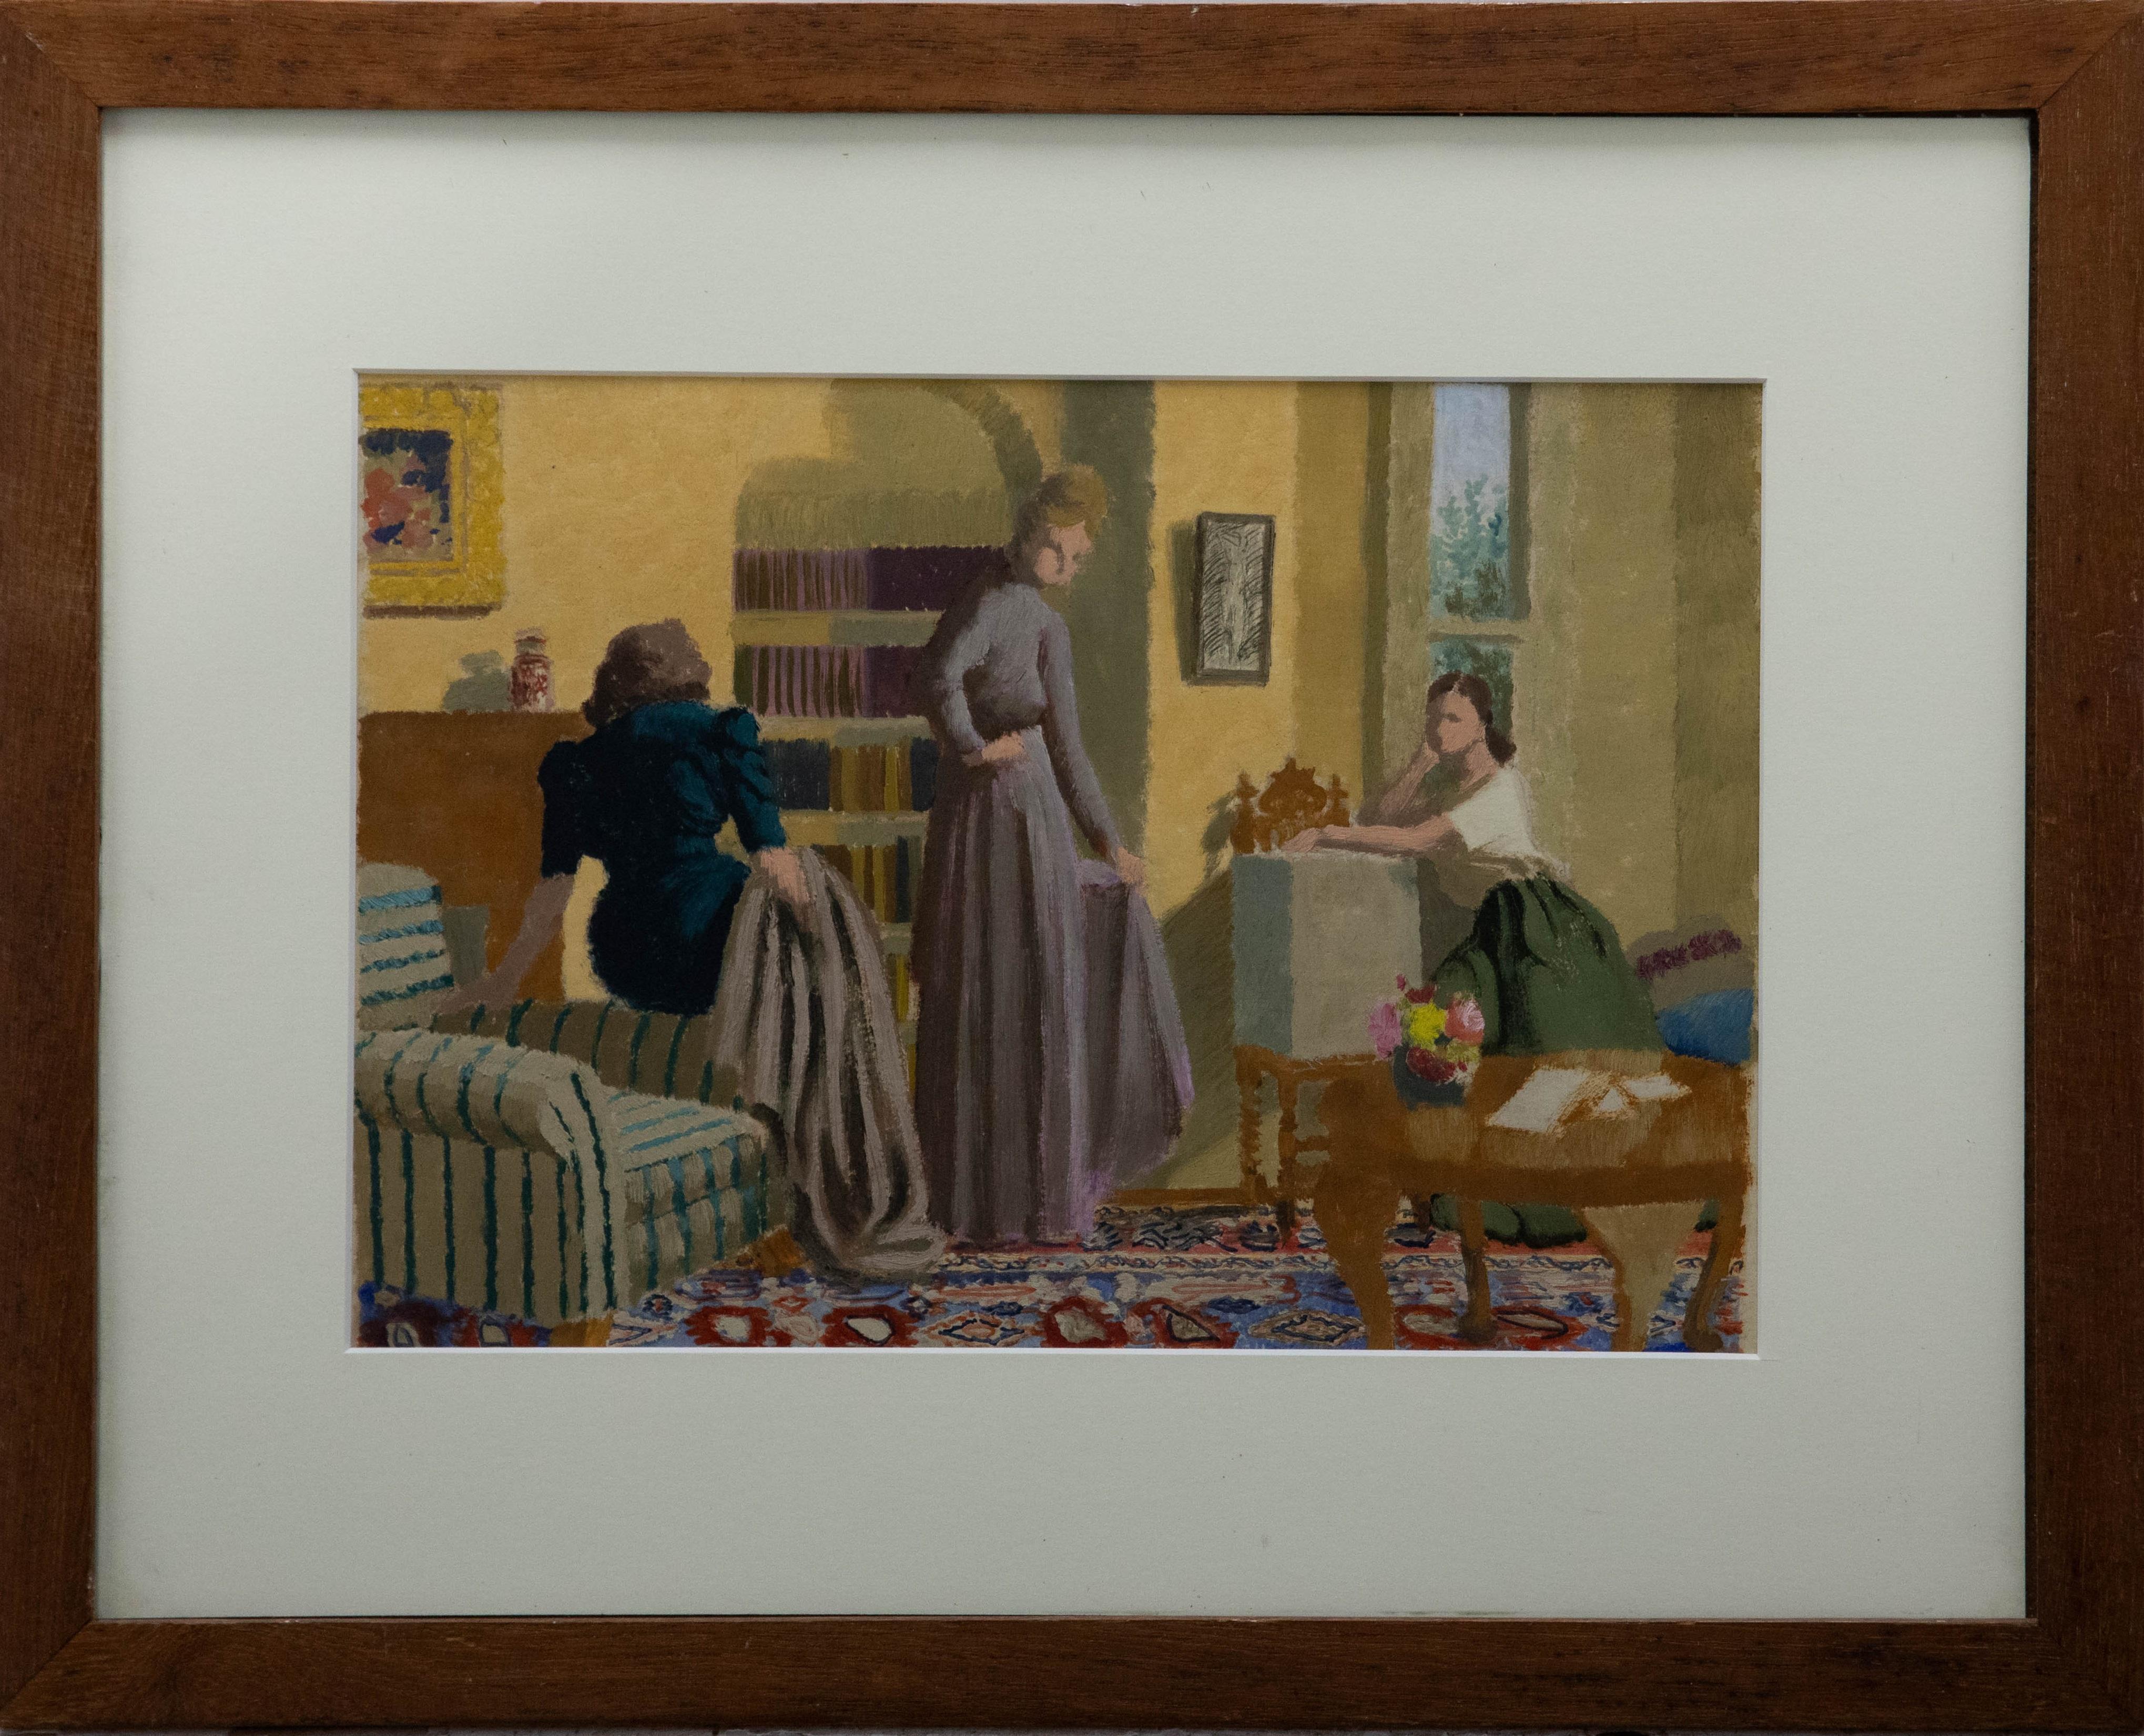 A fine interior study in oil by the British artist Vivian Berwick, depicting three ladies in a drawing room, variously posing while examining the dress of the central figure. The room is comfortably furnished with a striped armchair and a brightly